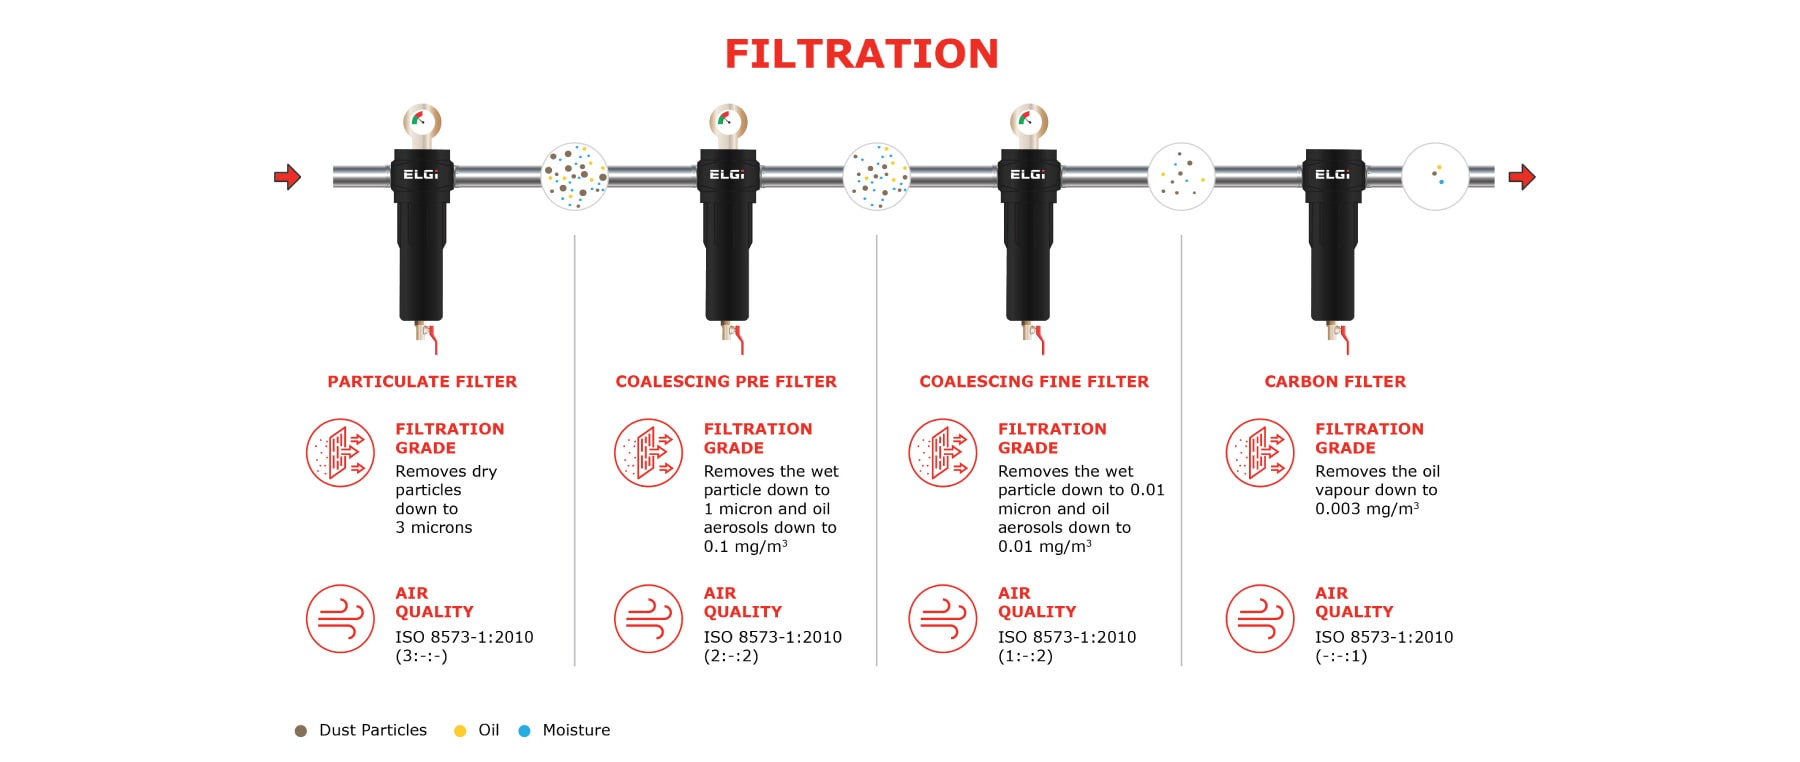 Carbon filters** are recommended to remove the oil vapour and other gases present in the compressed air which are not removed by coalescing filters